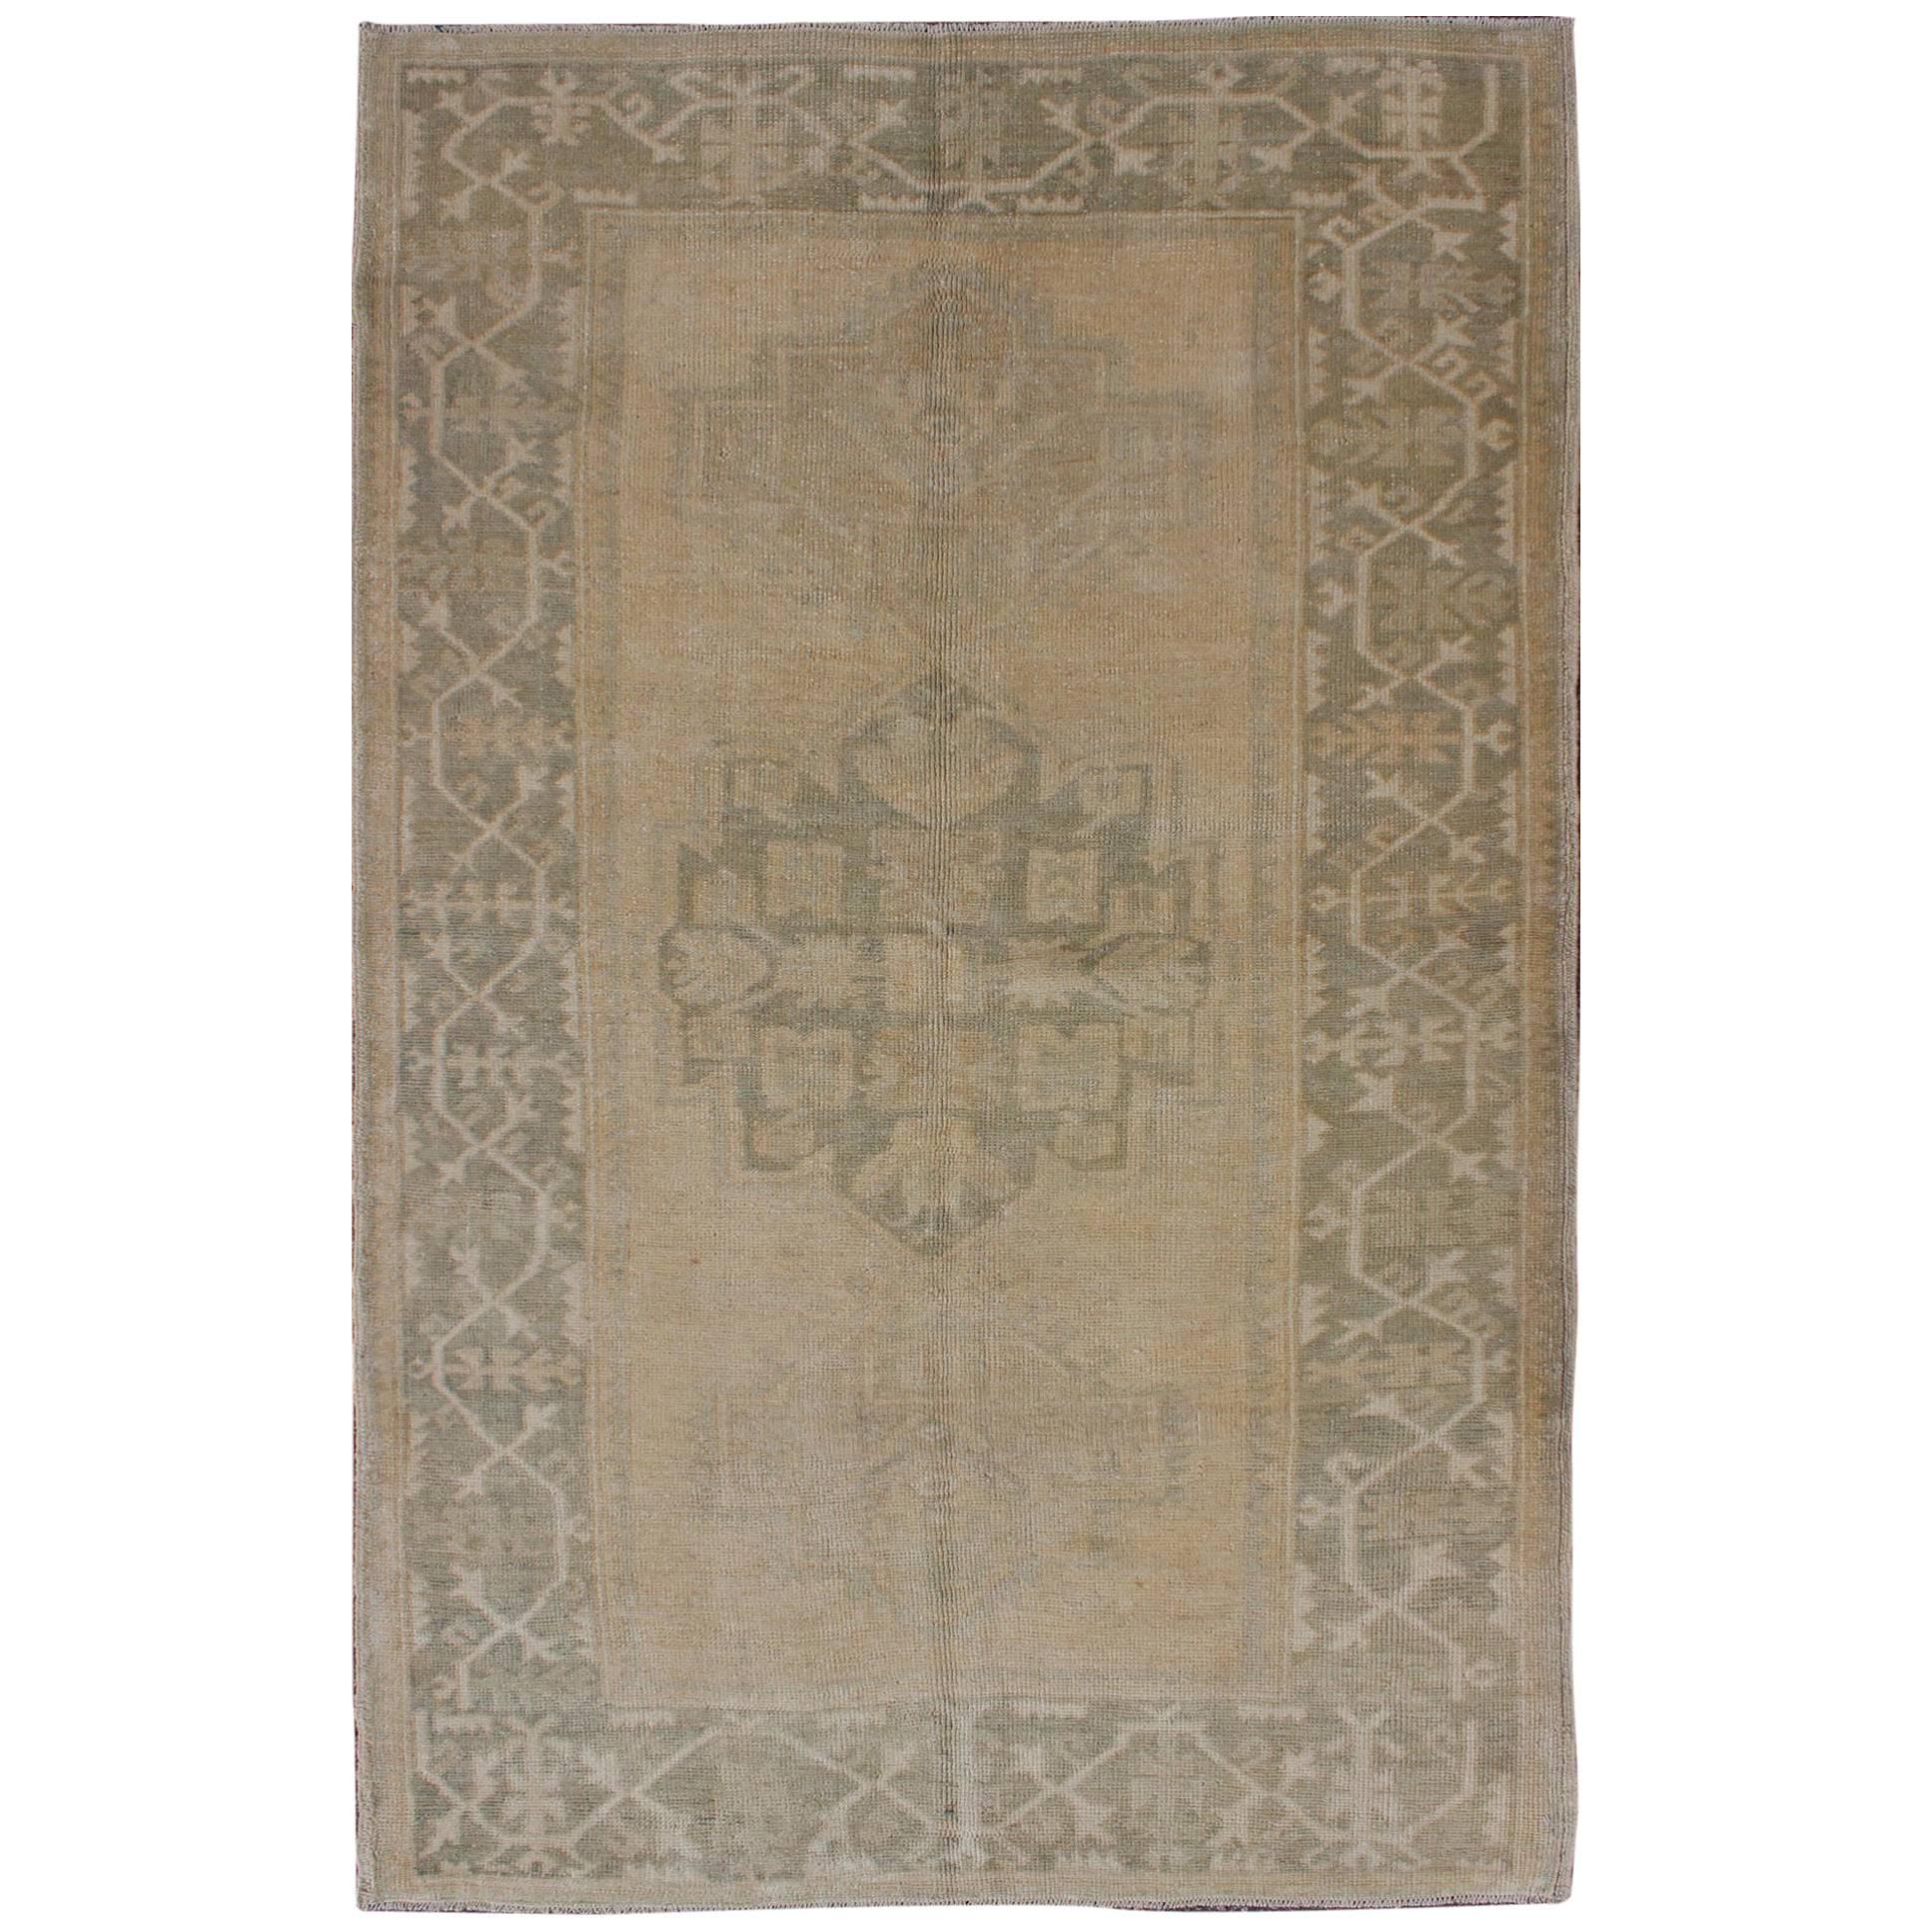 Medallion Vintage Turkish Oushak Rug in Taupe, Green and Sand Colors